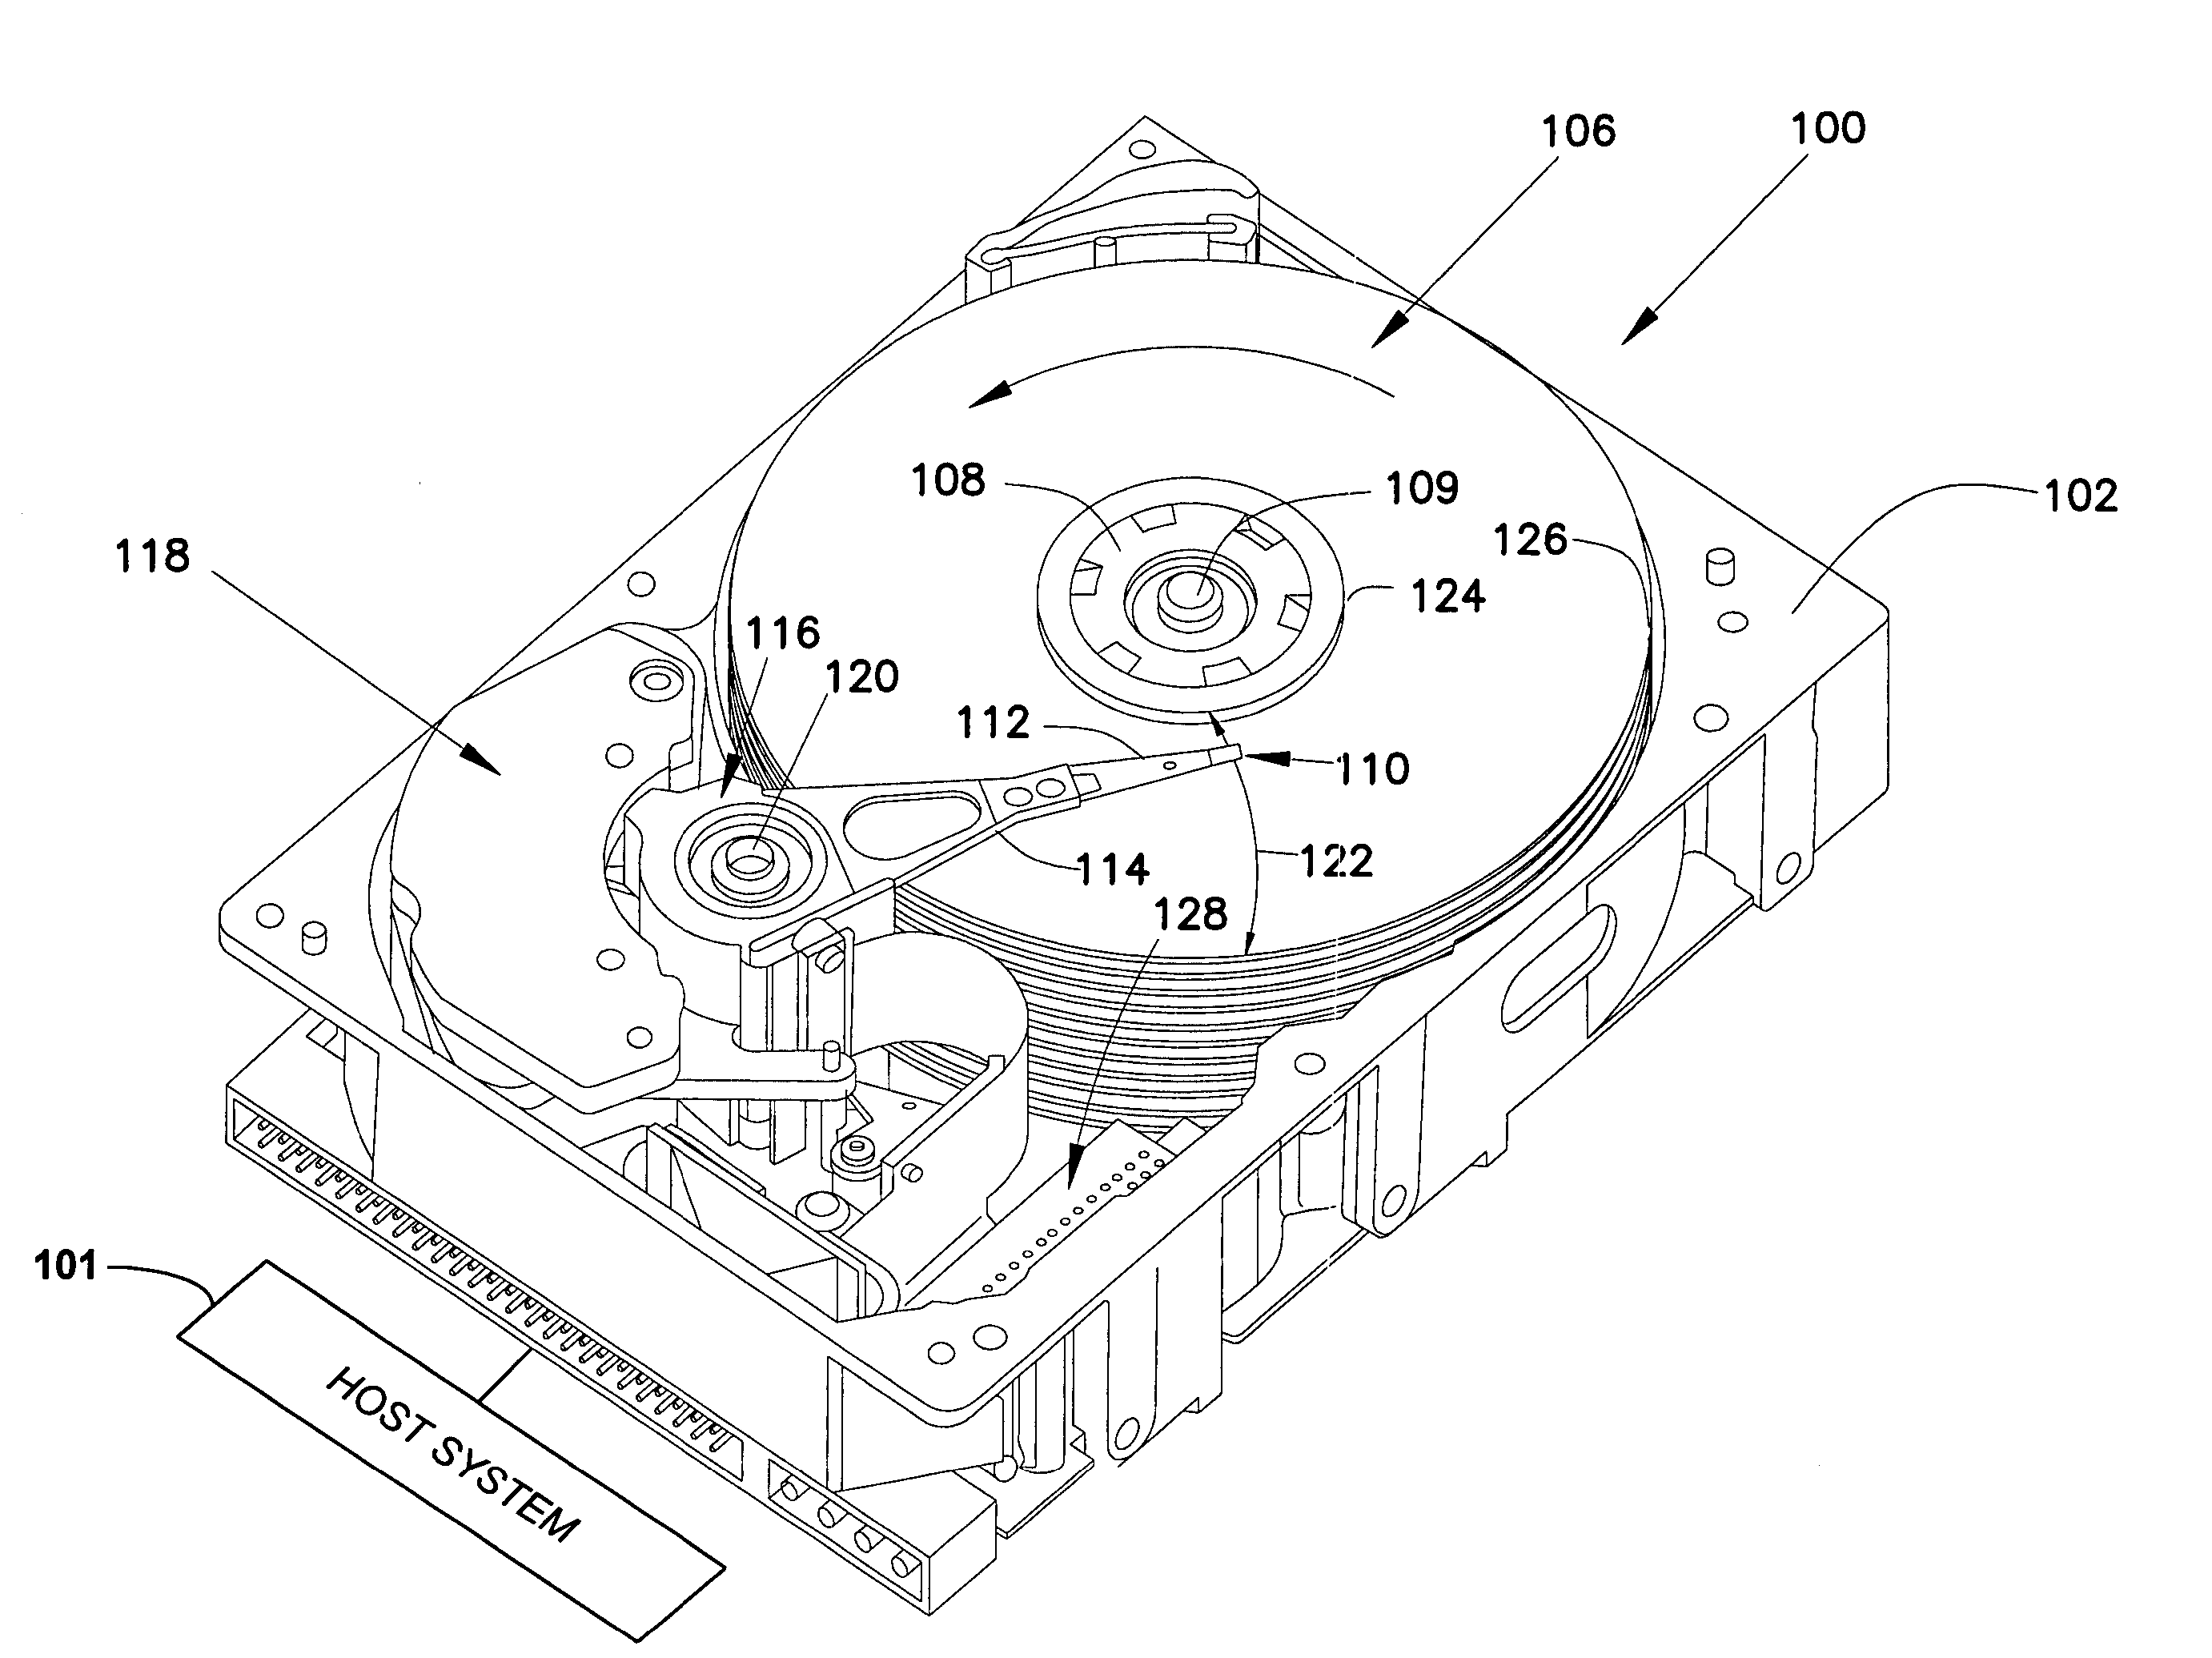 System and method for delivering versatile security, digital rights management, and privacy services